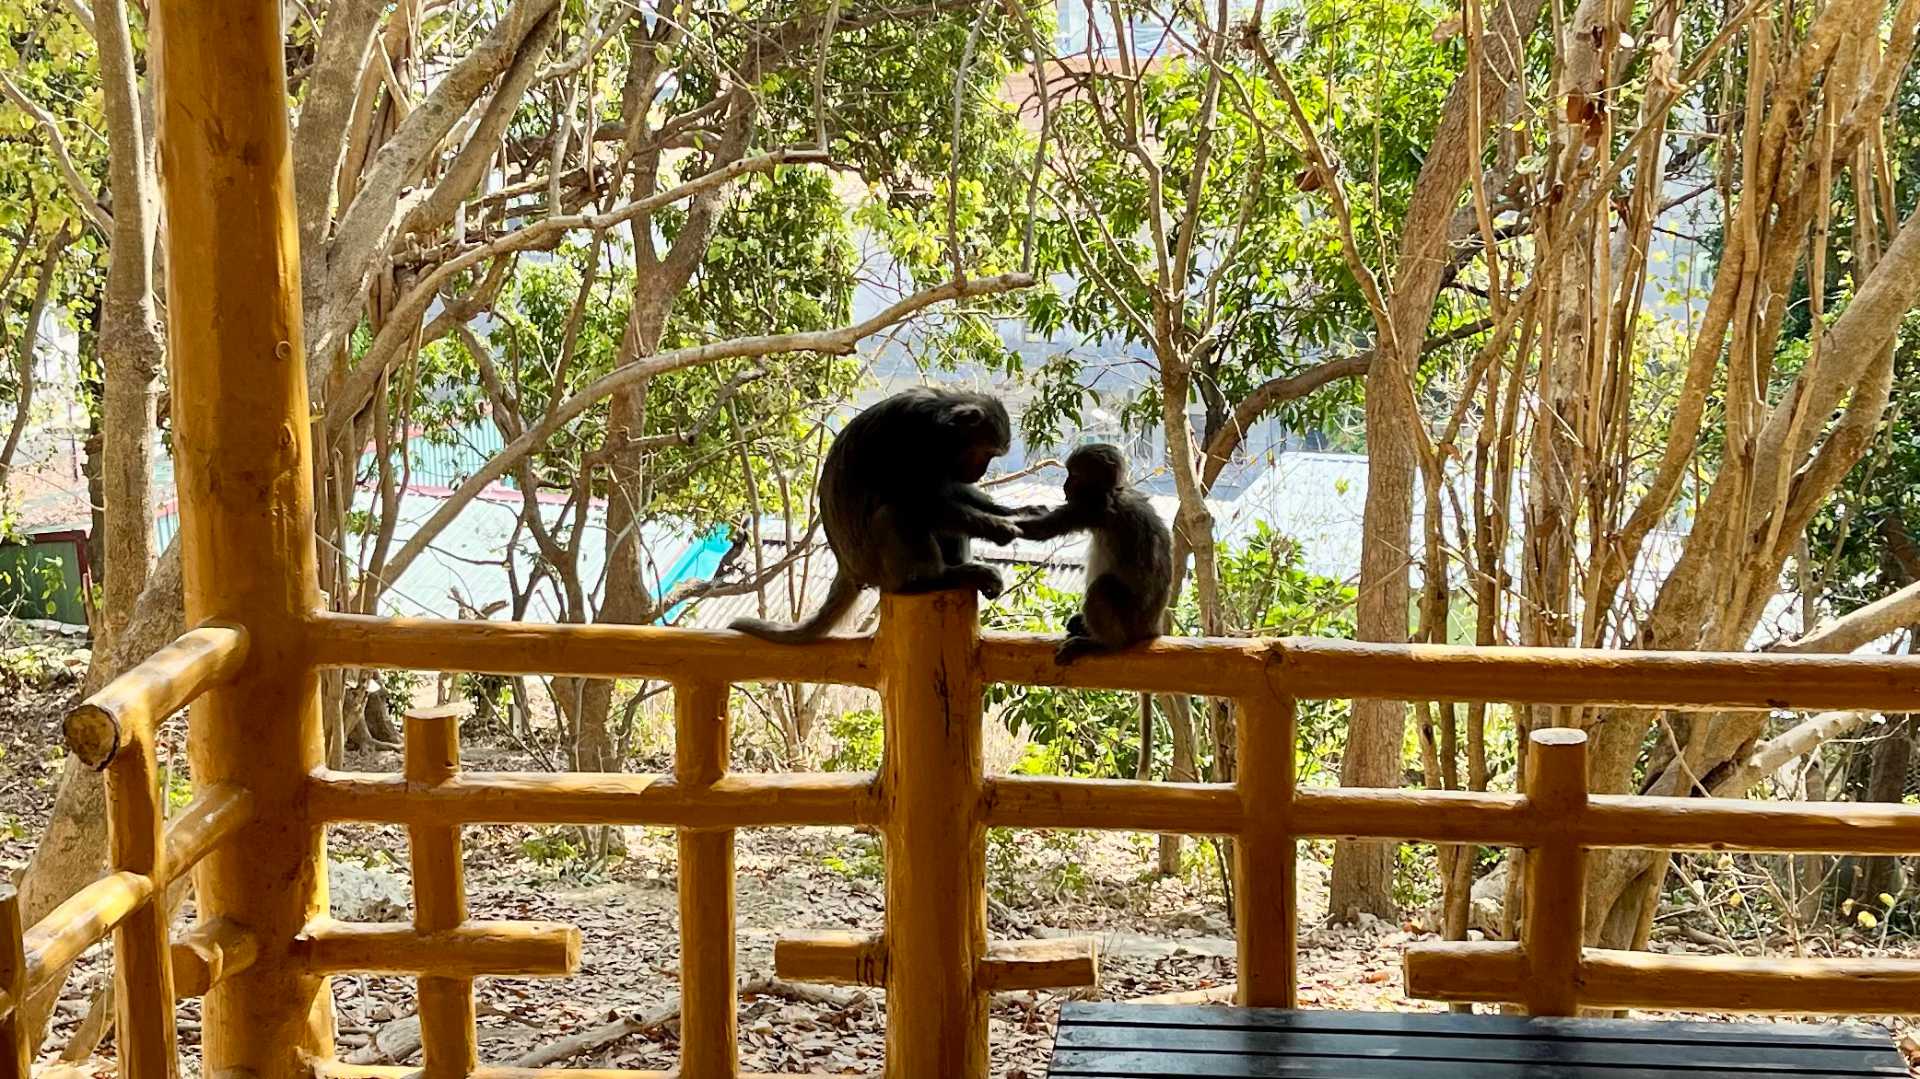 An adult monkey holds the hand of a younger monkey, while sitting on a bannister at a rest stop pavilion.